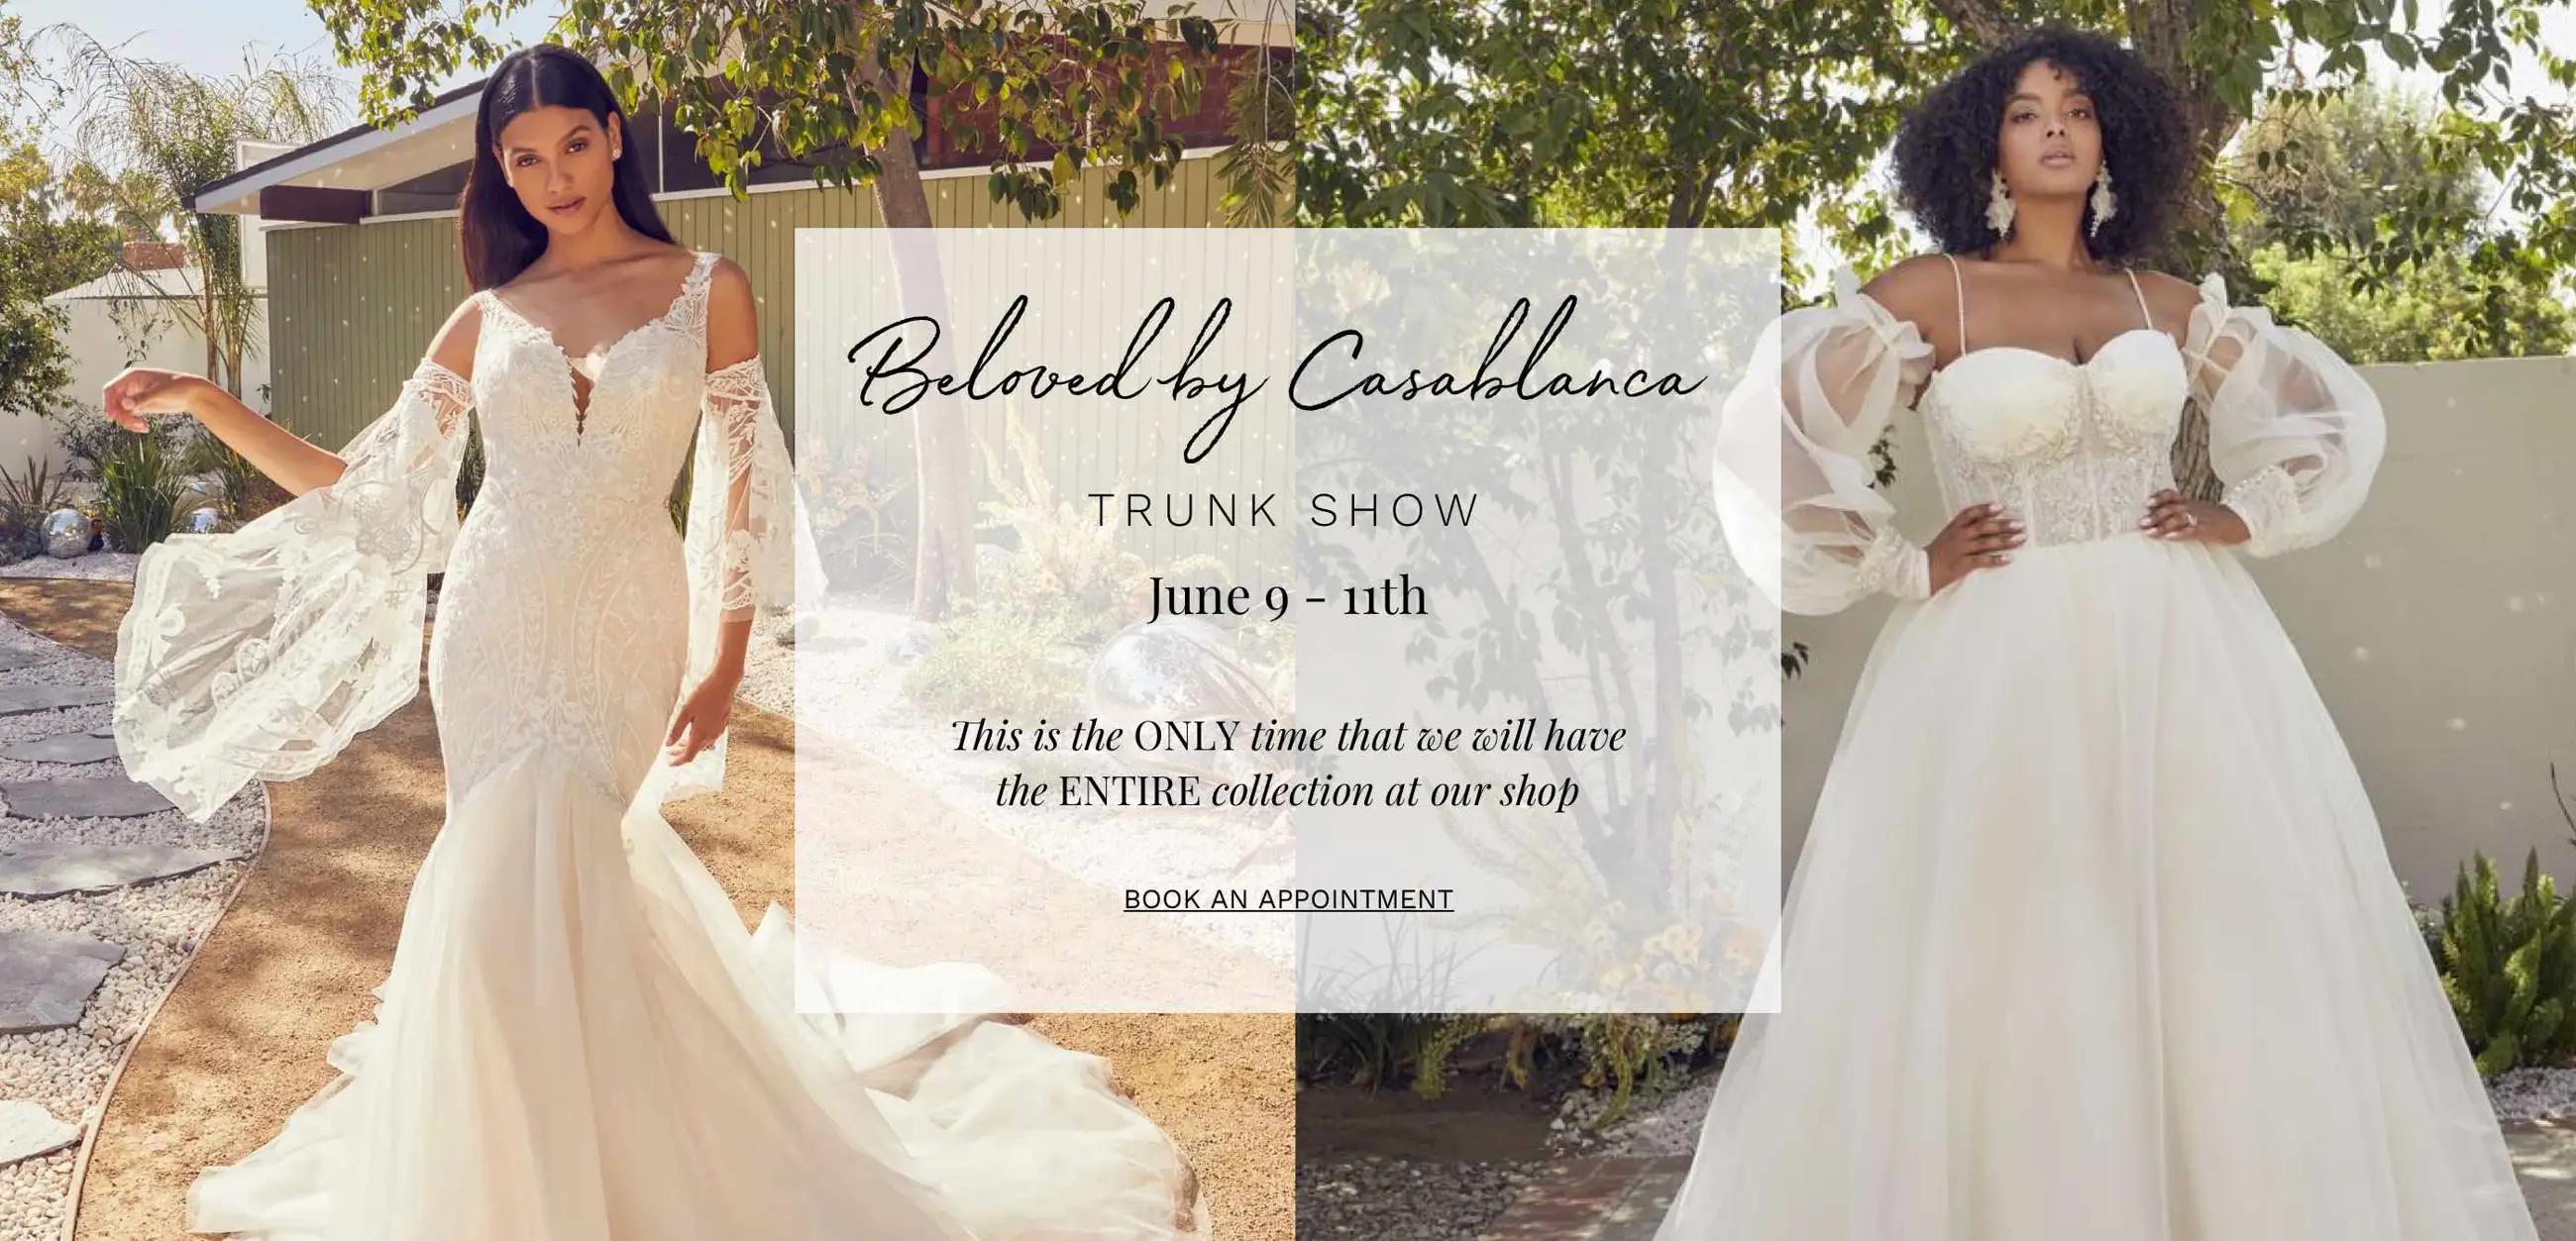 Beloved by Casablanca Trunk Show at Dublin Bridal. Two models wearing Beloved by Casablanca wedding dresses.